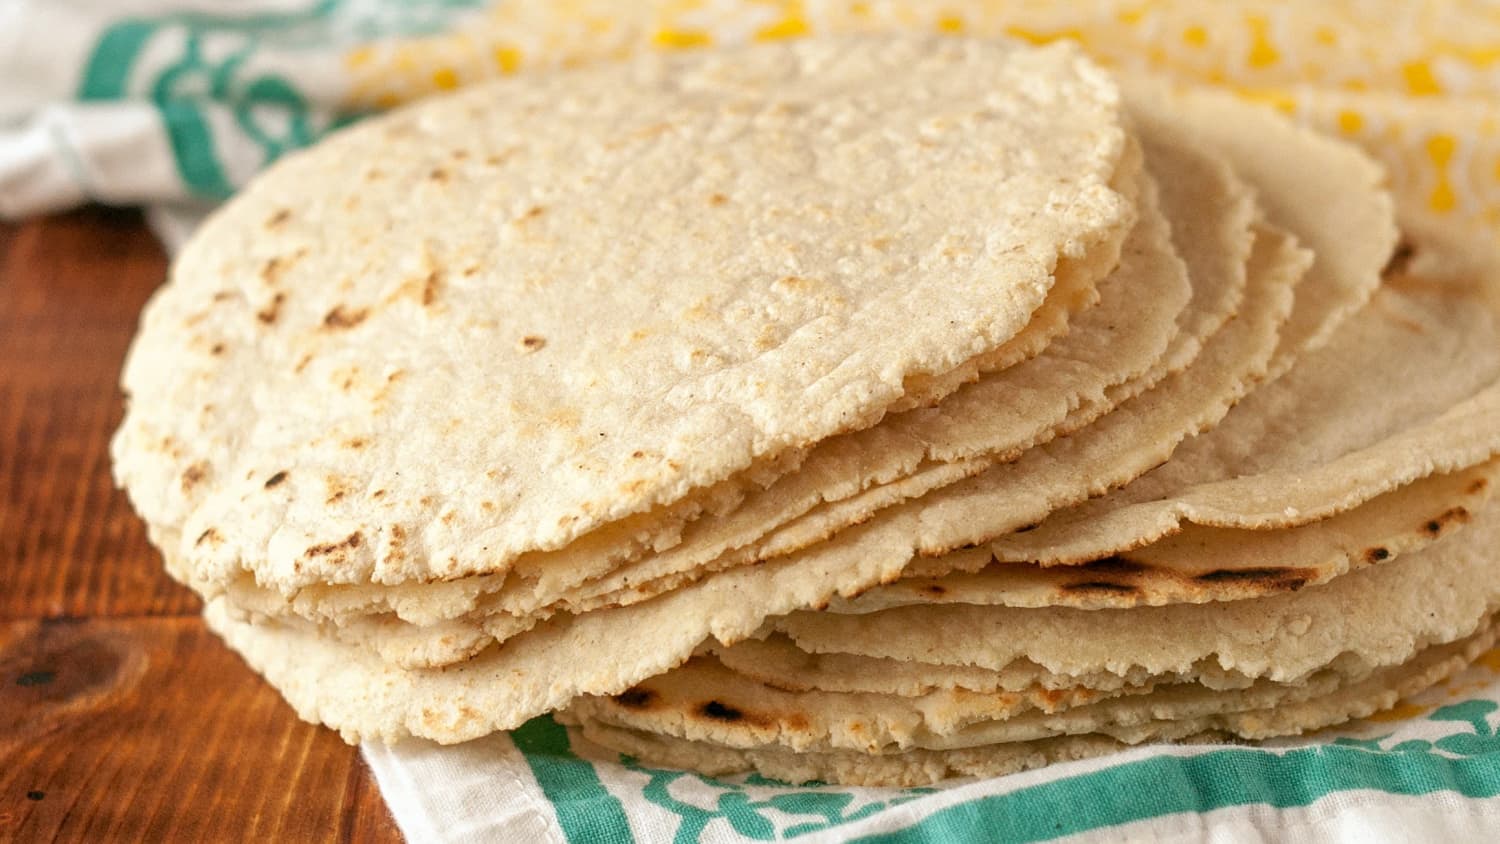 How To Make Corn Tortillas From Scratch